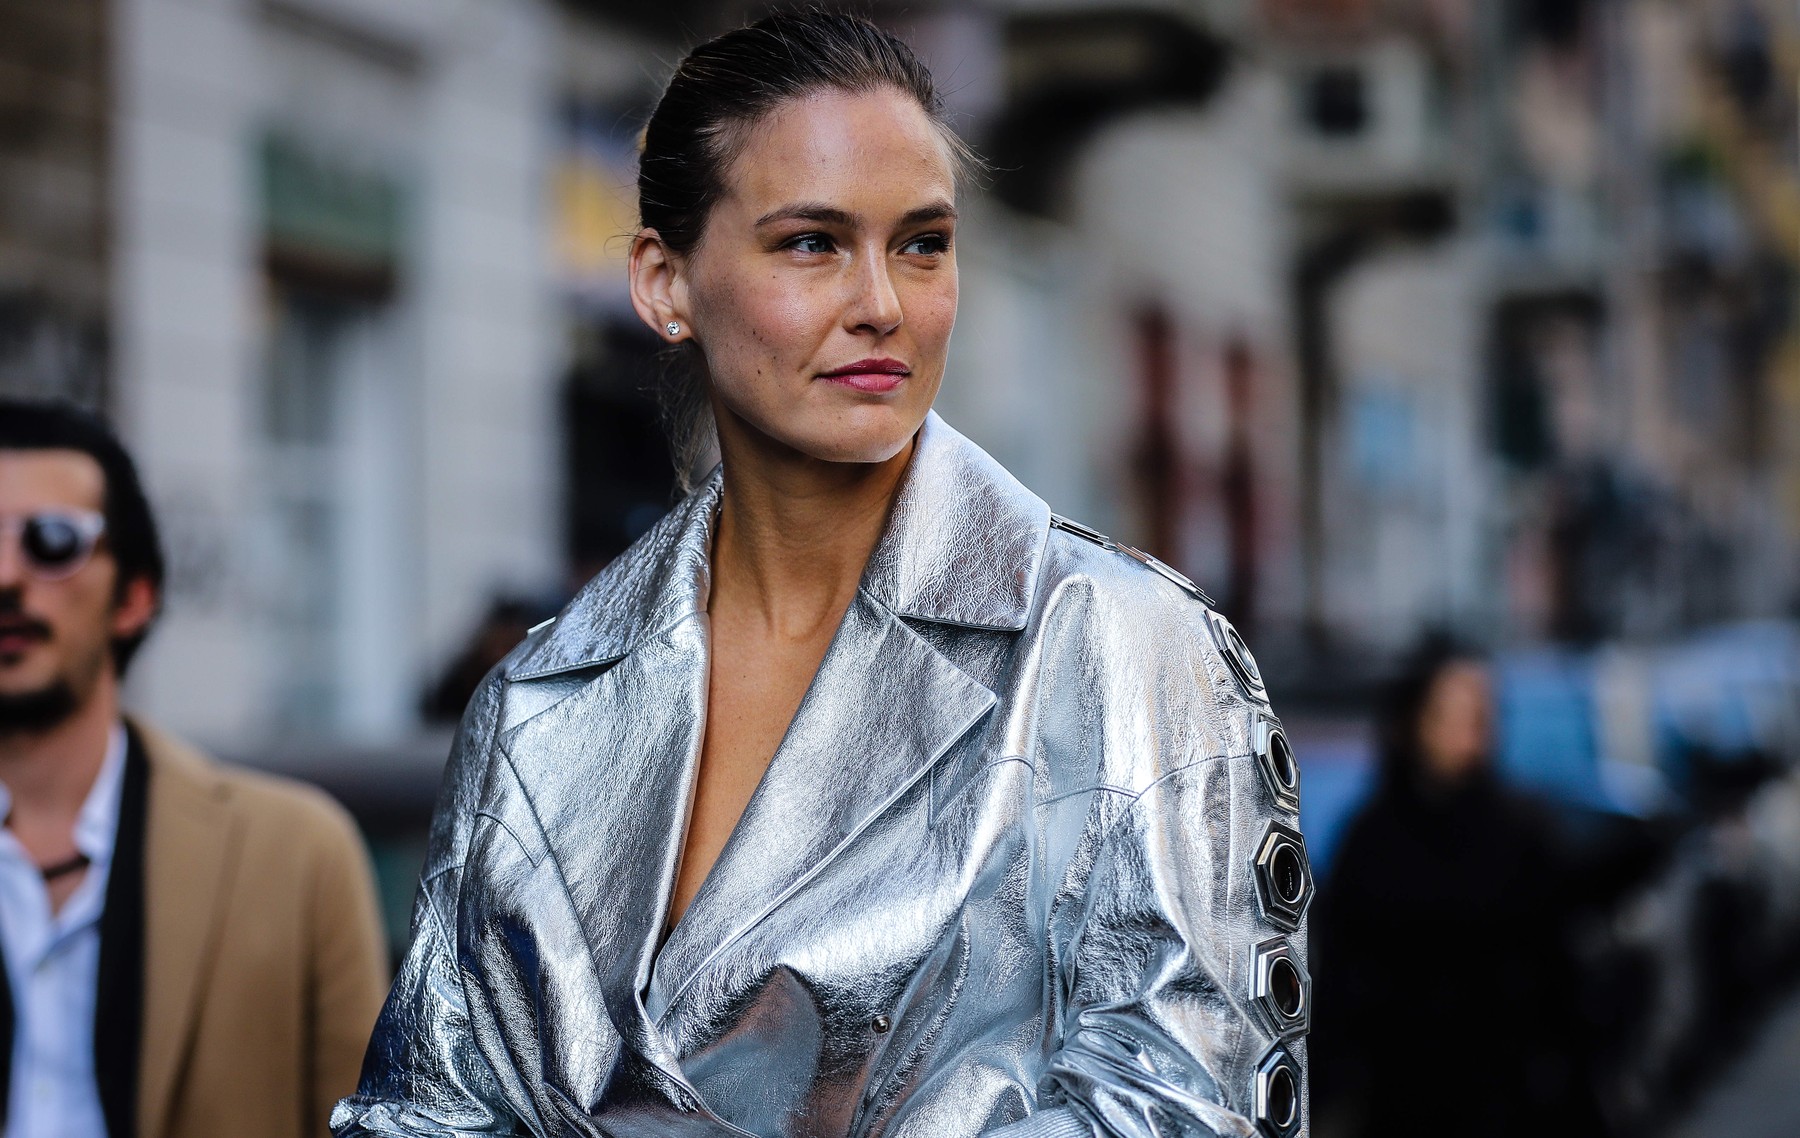 February 21, 2019 - Milan, Italy - MILAN, Italy- February 20 2019: Bar Rafaeli on the street during the Milan Fashion Week.,Image: 426569557, License: Rights-managed, Restrictions: , Model Release: no, Credit line: Mauro Del Signore / Zuma Press / Profimedia